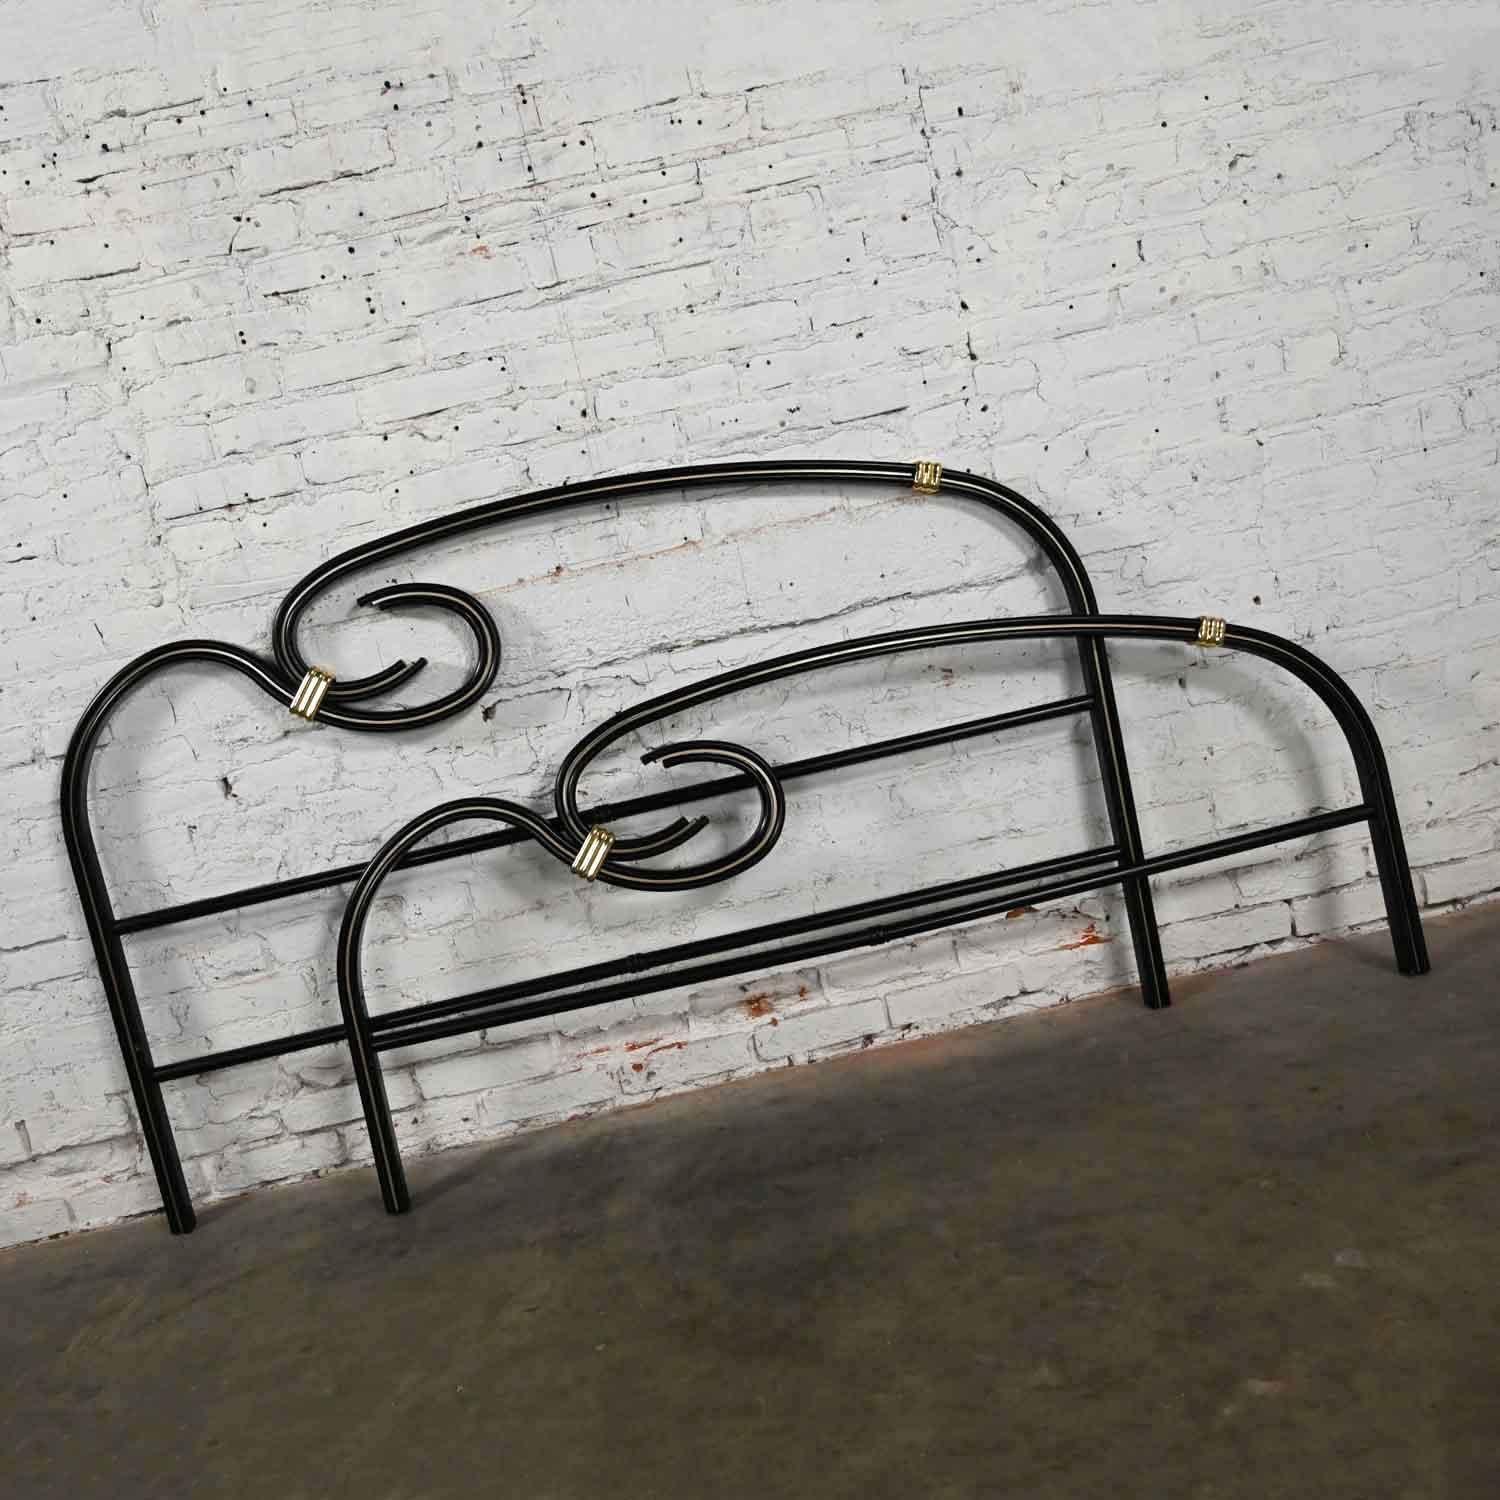 Lovely Art Deco Revival black and gold accent filled flattened metal tube queen side bed signed by Michele Archiutti. Beautiful condition, keeping in mind that this is vintage and not new so will have signs of use and wear. The finish was originally